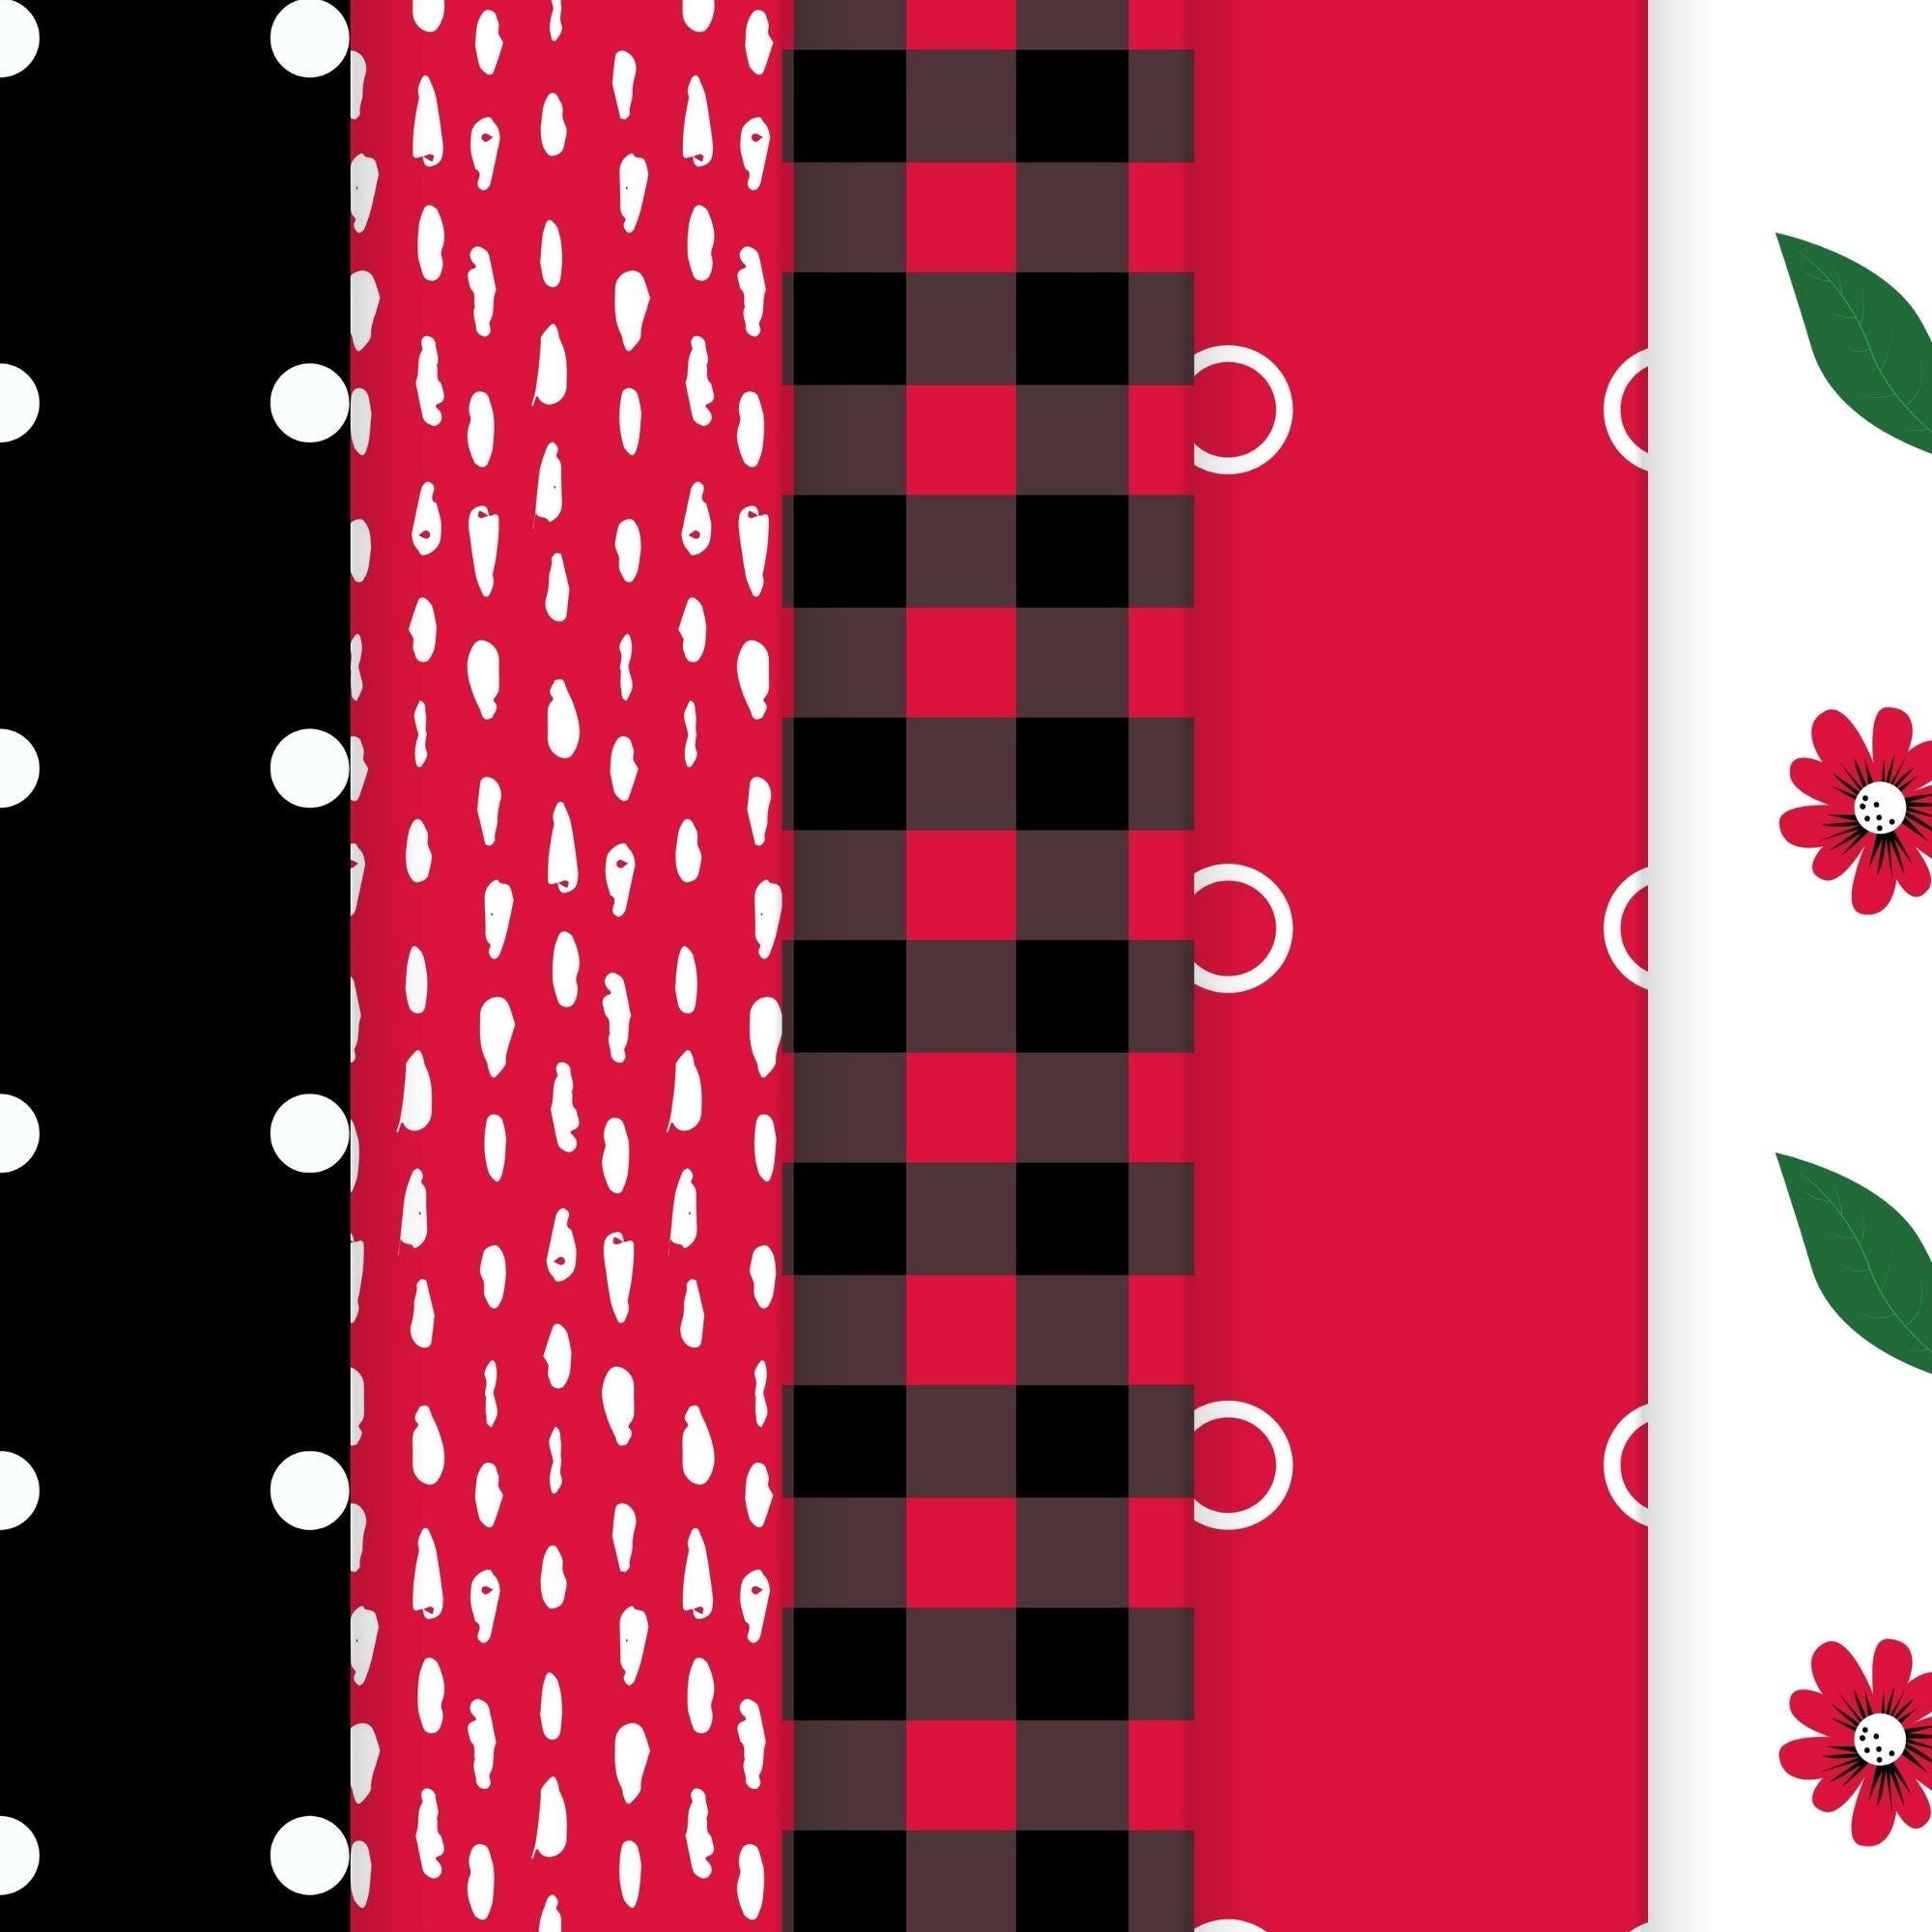 Scrapbookers, this is what you've been looking for! This ladybug themed bundle has 30 unique images that can be printed or used as digital backgrounds.